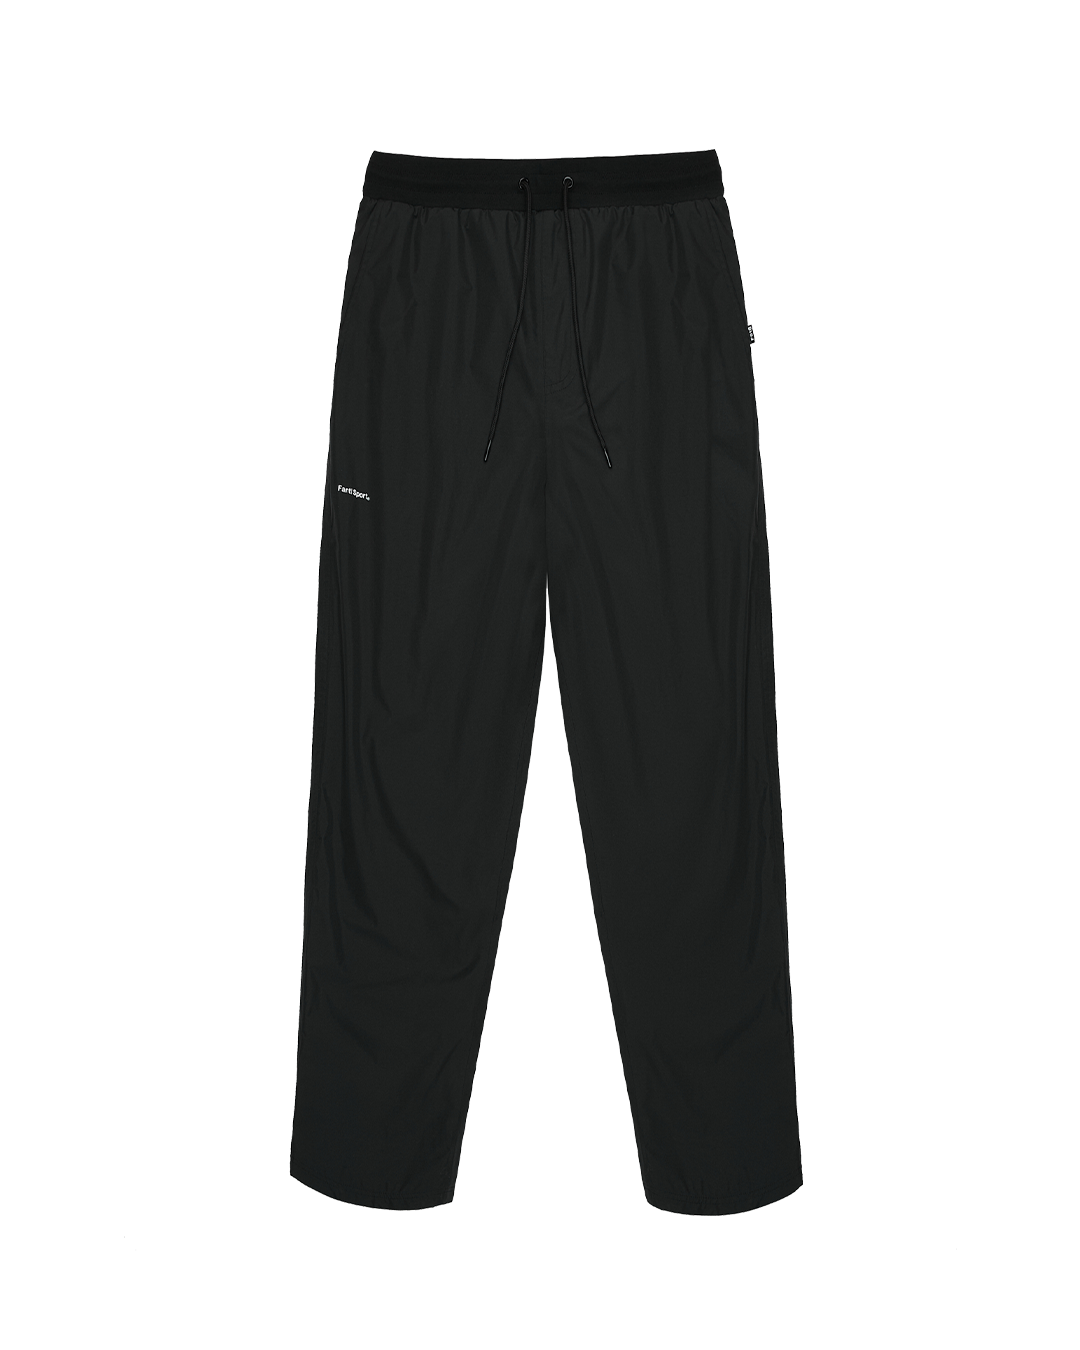 The Williams Water Pant